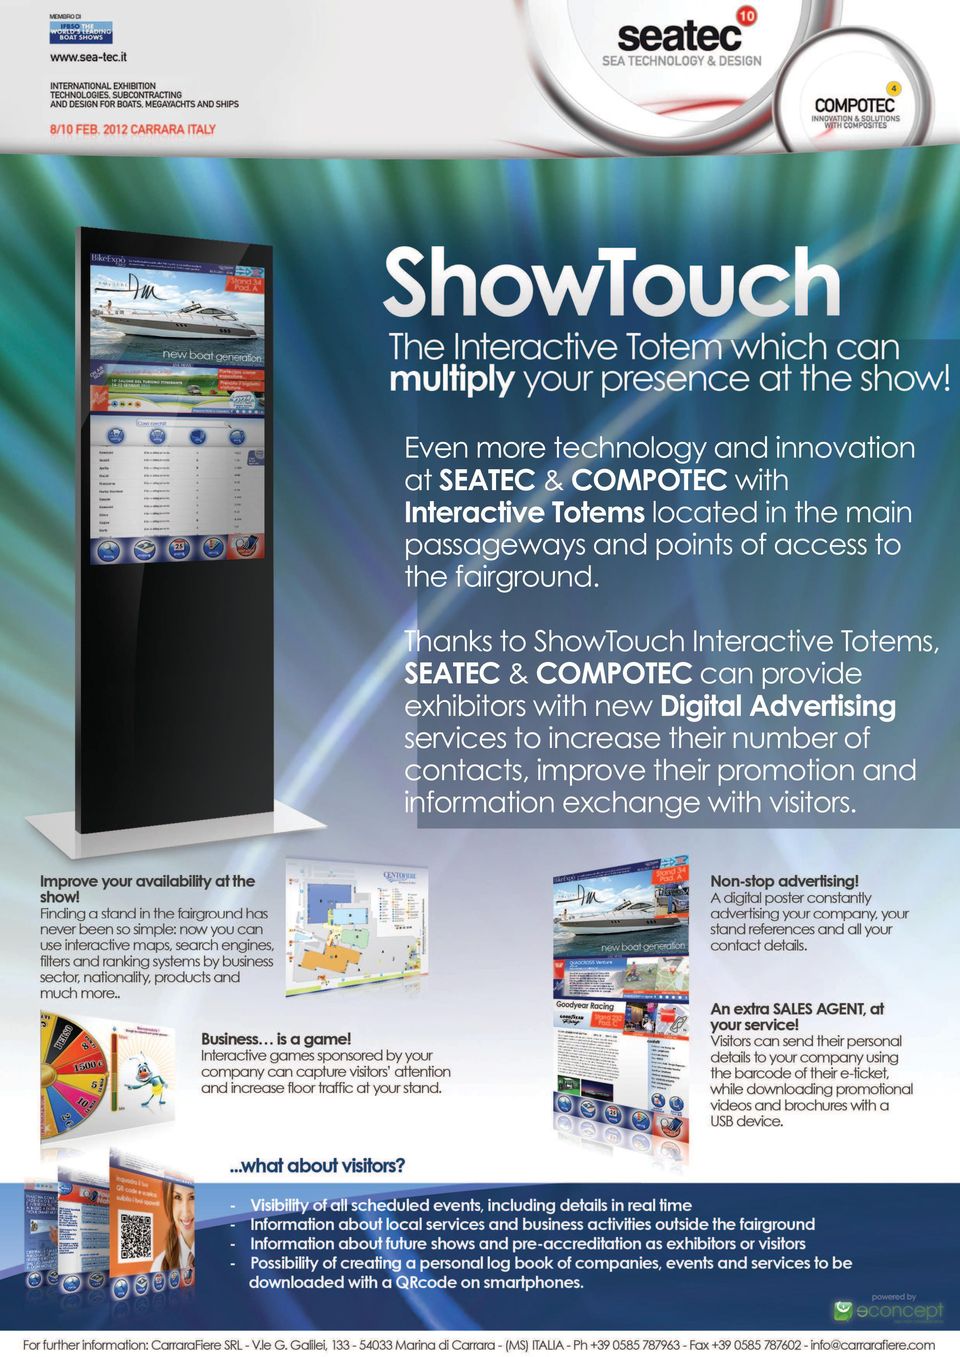 Thanks to ShowTouch Interactive Totems, SEATEC & COMPOTEC can provide exhibitors with new